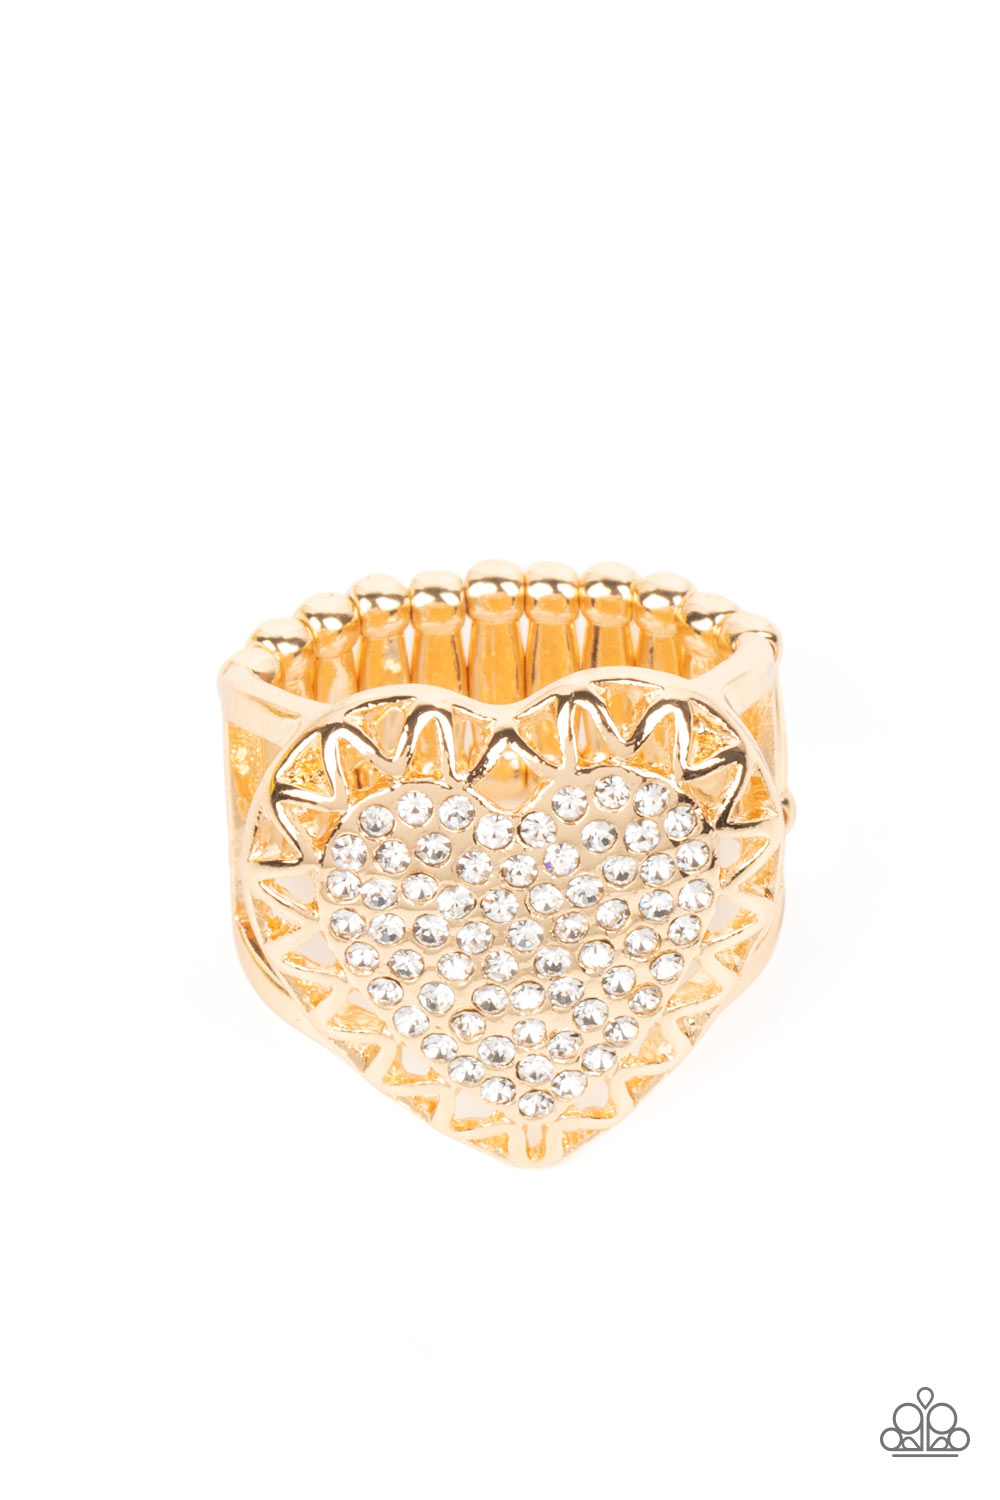 Romantic Escape Gold Ring - Paparazzi Accessories  An airy gold frame with cutouts resembling a subtle zig-zag pattern, wraps around a heart filled with brilliant white rhinestones to create a dazzling centerpiece atop the finger. Features a stretchy band for a flexible fit.  Sold as one individual ring.